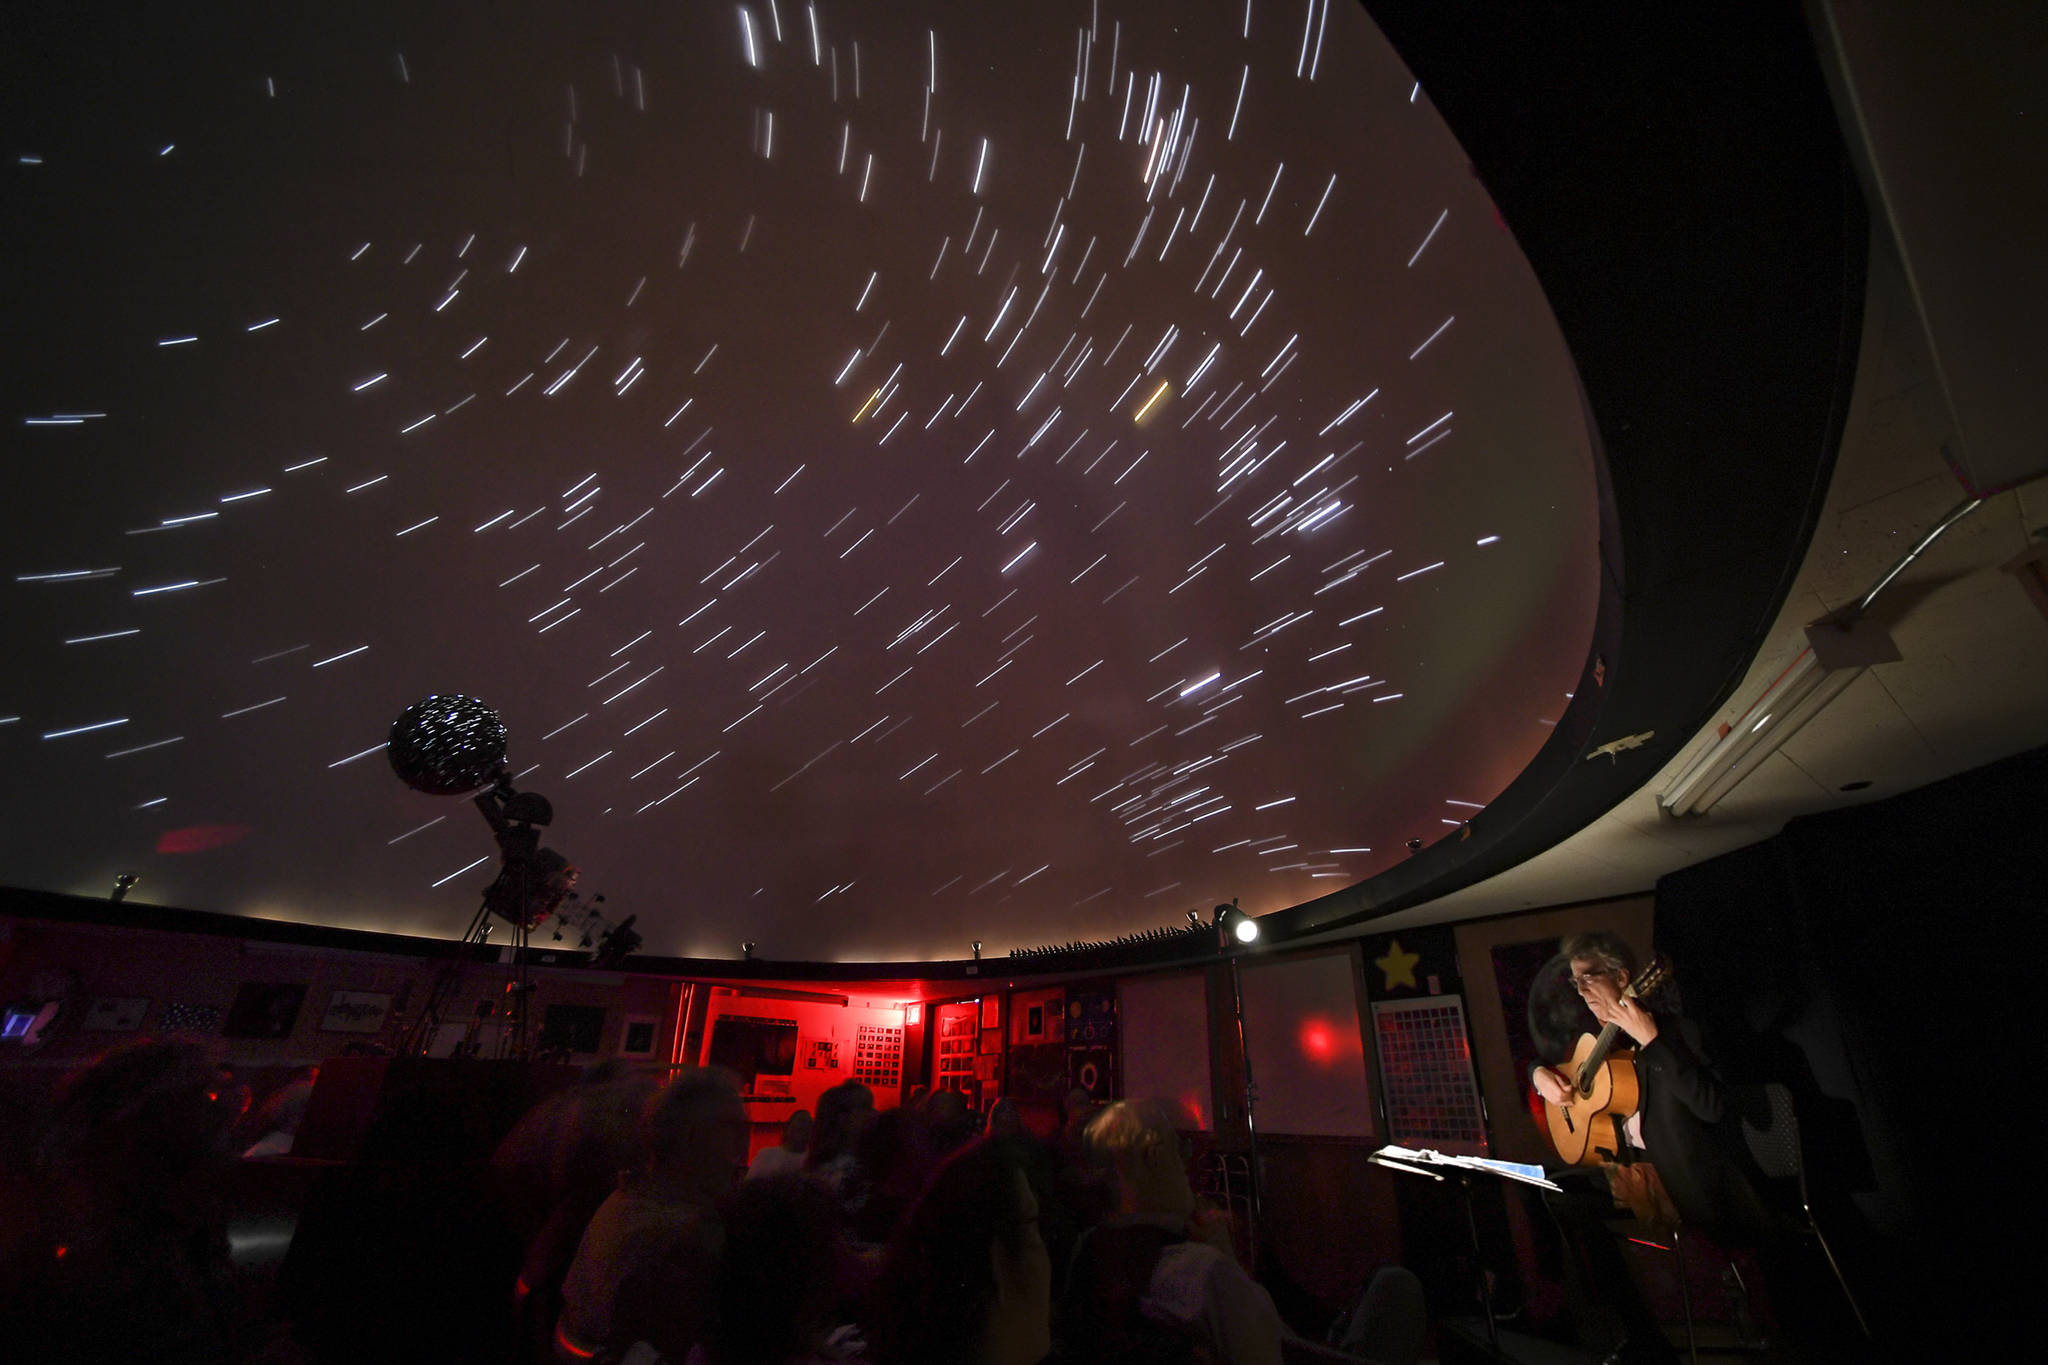 Classical guitarist Eliot Fisk plays “Bach Under the Stars” at the Marie Drake Planetarium as part of Juneau Jazz & Classics on Thursday, May 9, 2019. The music festival continues through May 18. (Michael Penn | Juneau Empire)